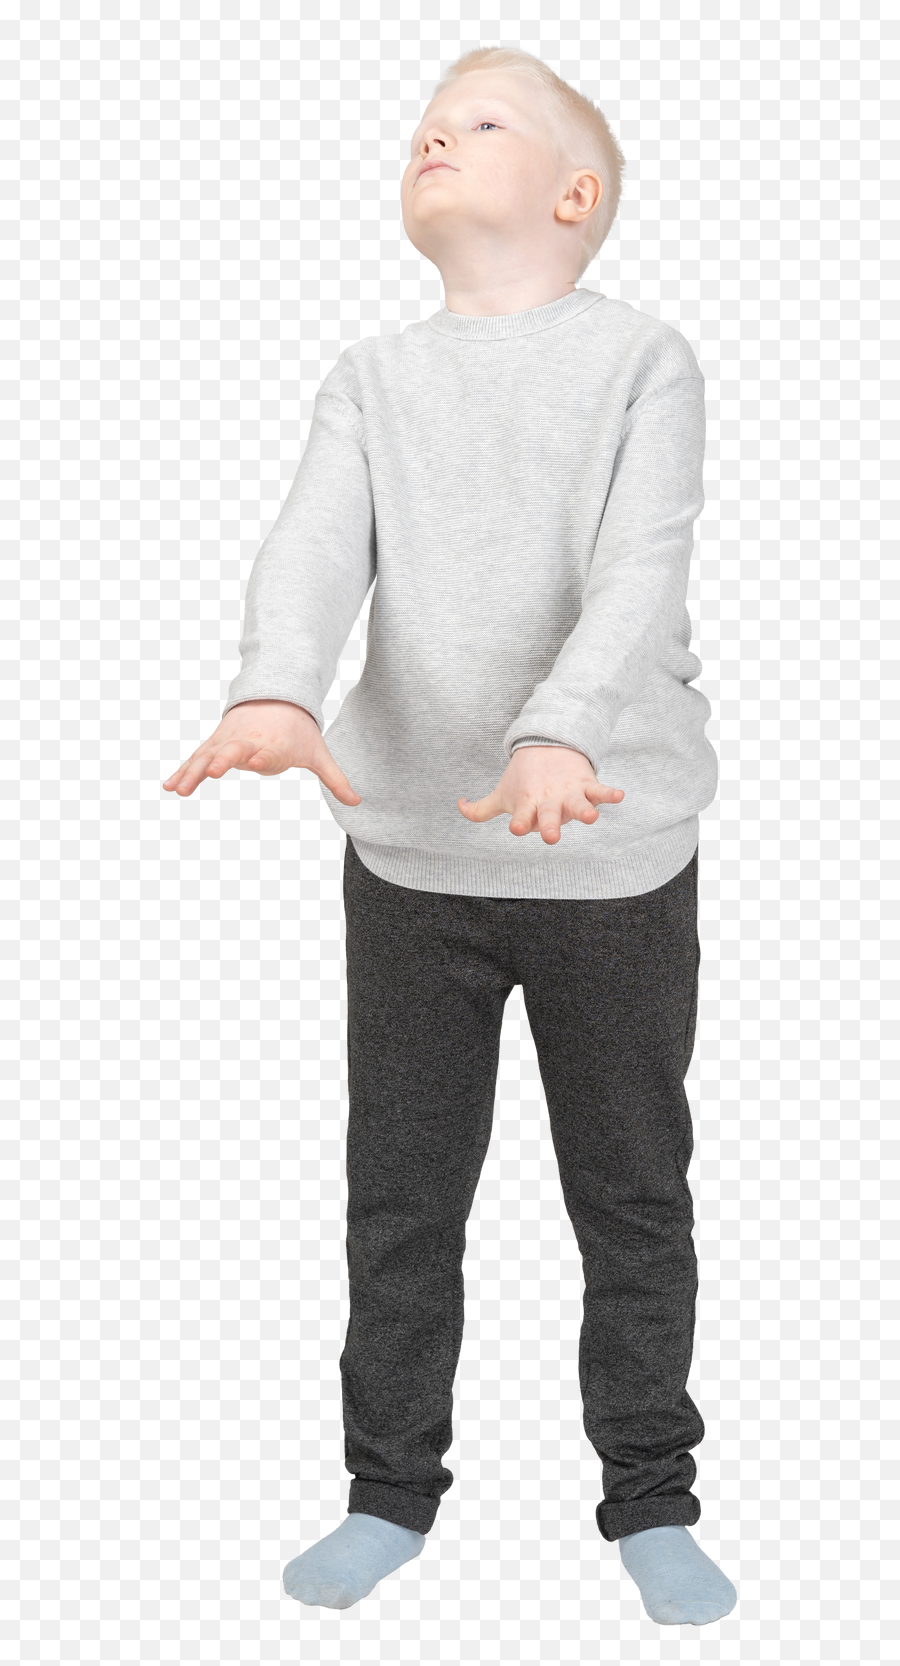 Front View Of A Blond Little Boy Standing Still And Looking Emoji,Arms Up And Down Emoji